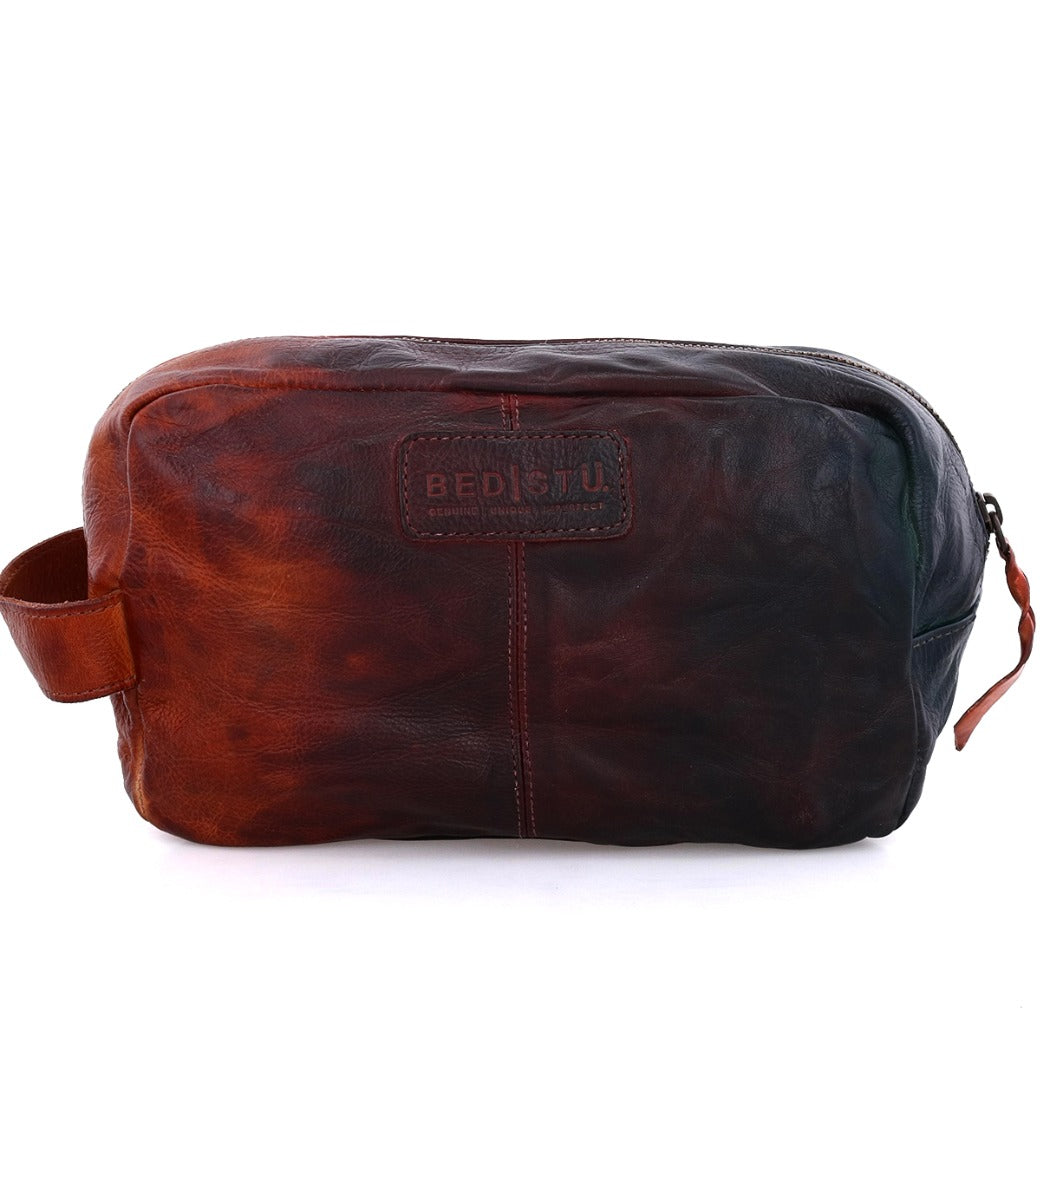 A Yatra brown leather toiletry bag on a white background. Branded Bed Stu.